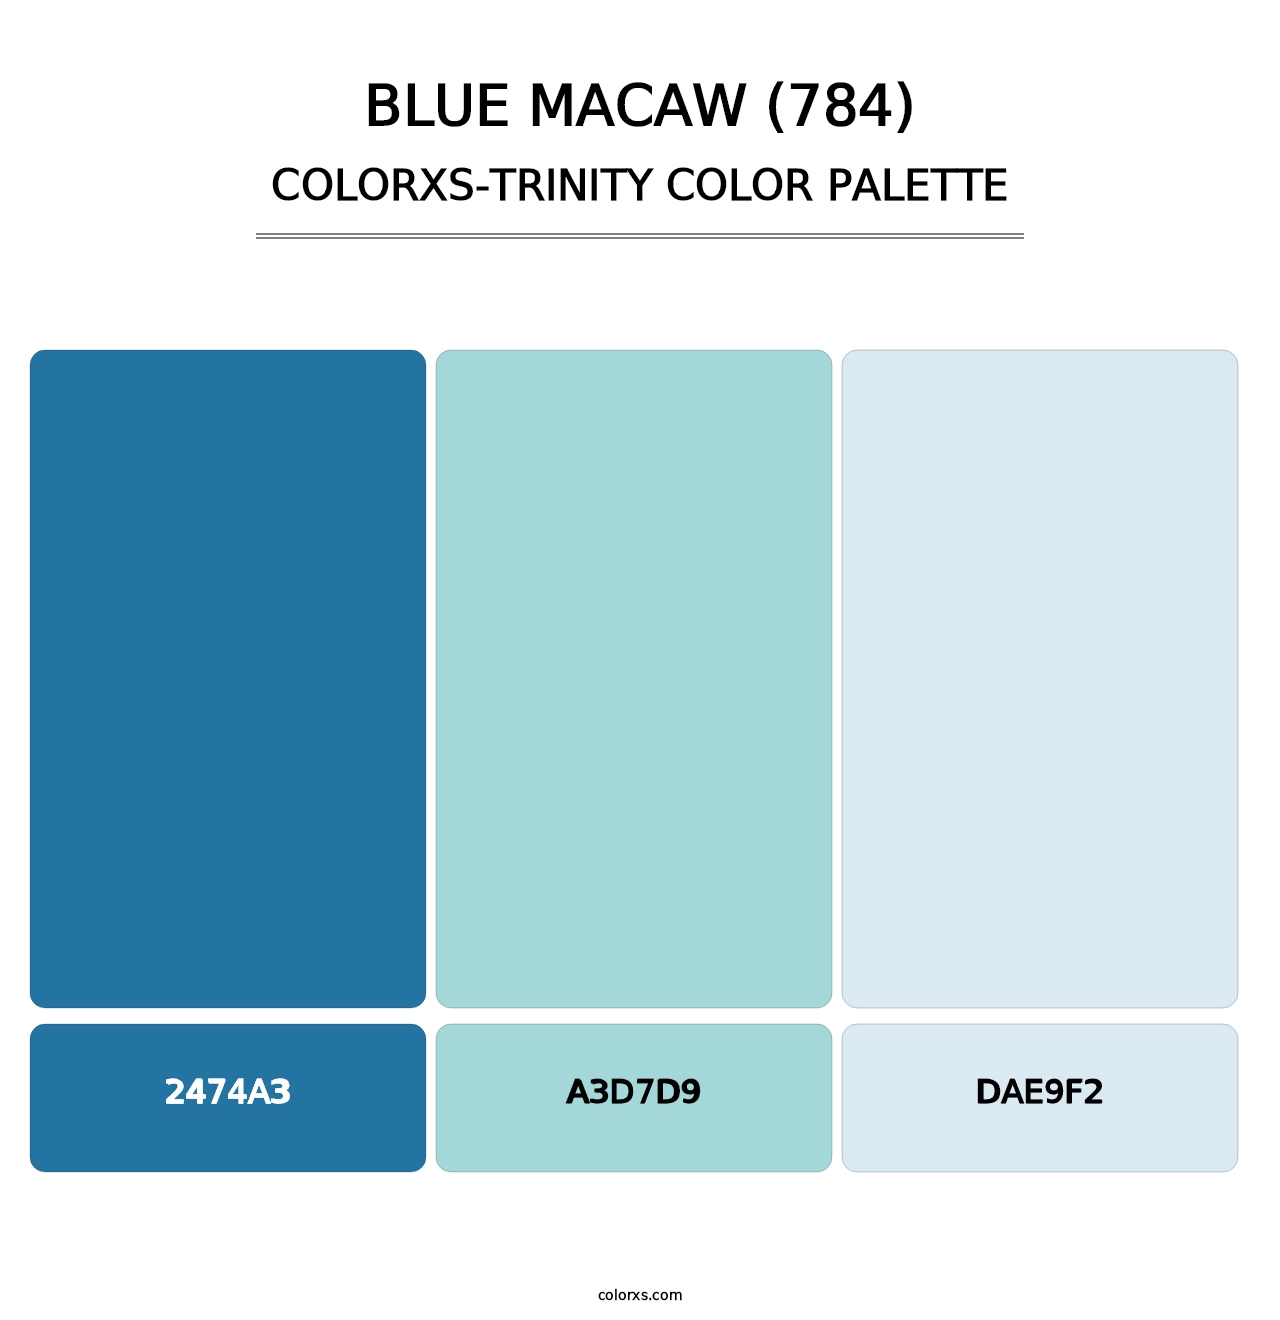 Blue Macaw (784) - Colorxs Trinity Palette